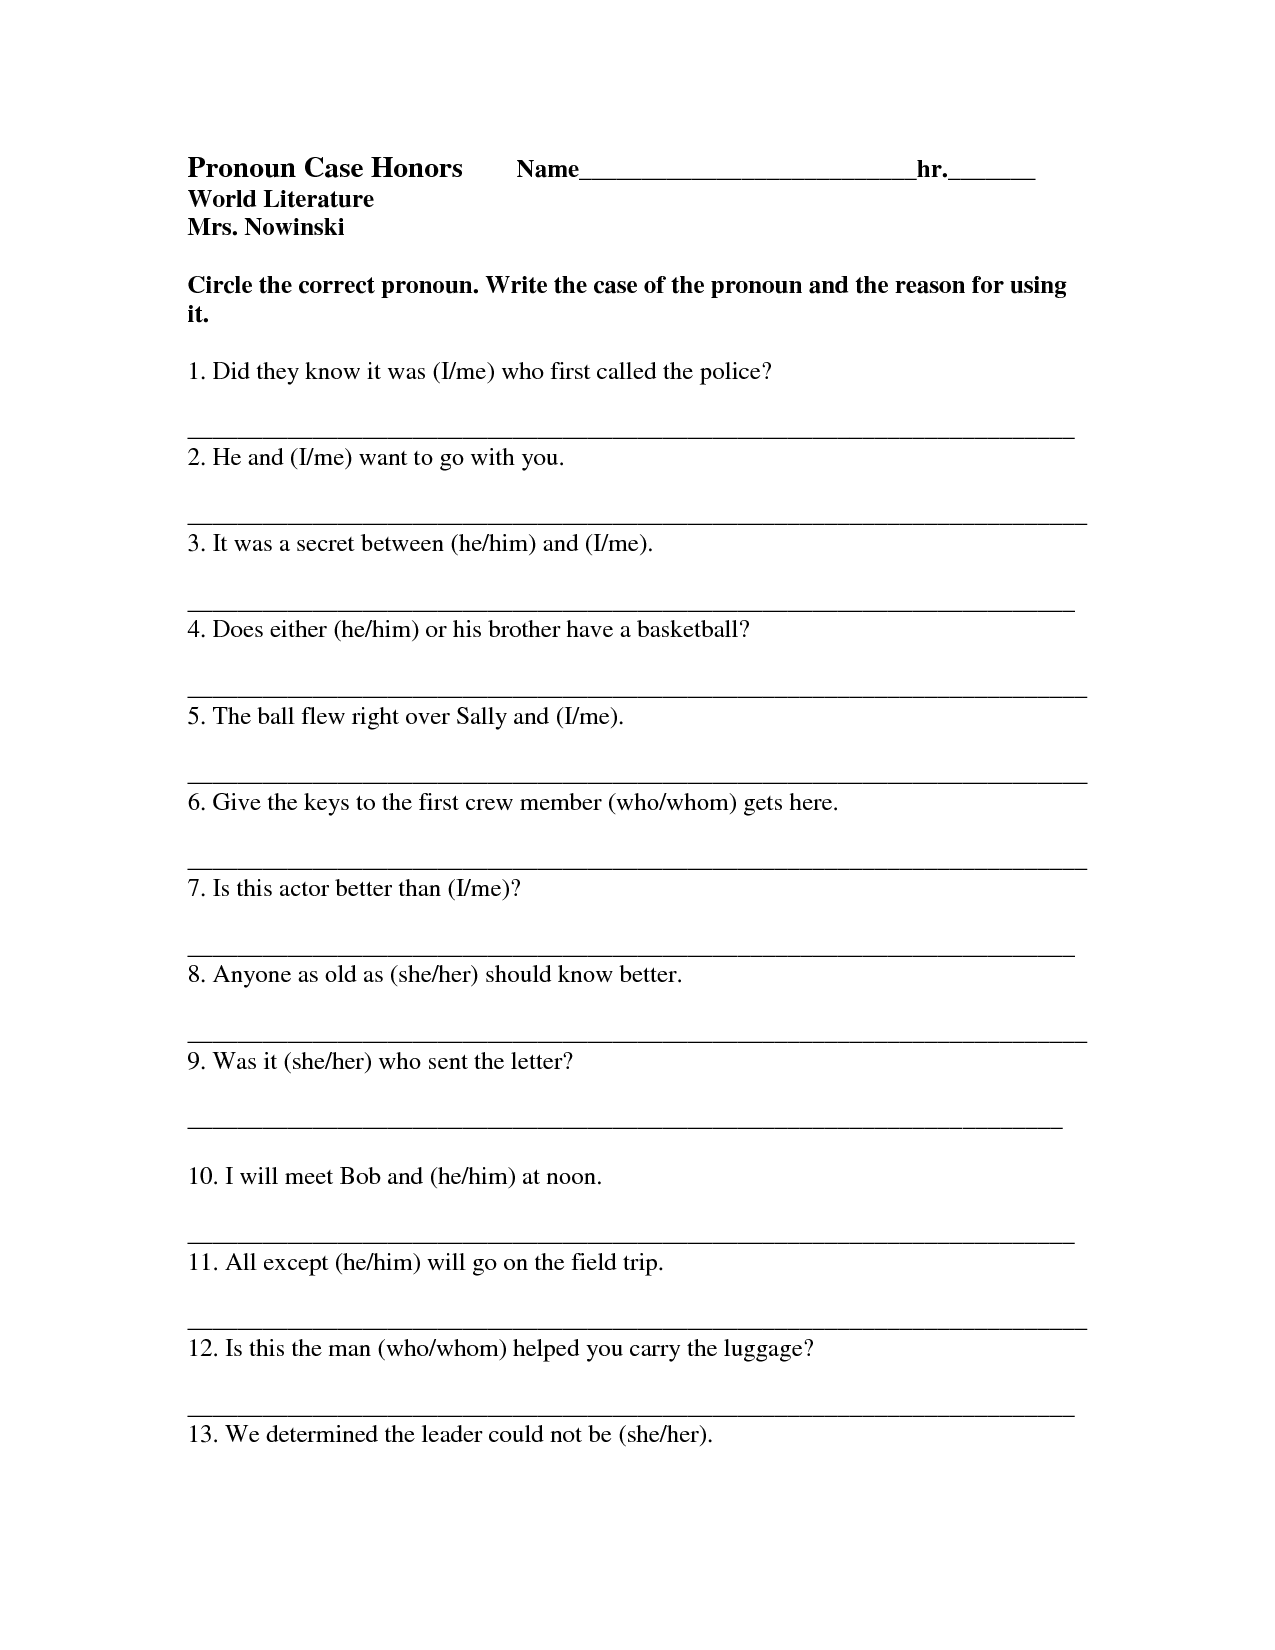 19-best-images-of-pronoun-who-whom-worksheets-printable-worksheet-who-whose-whom-relative